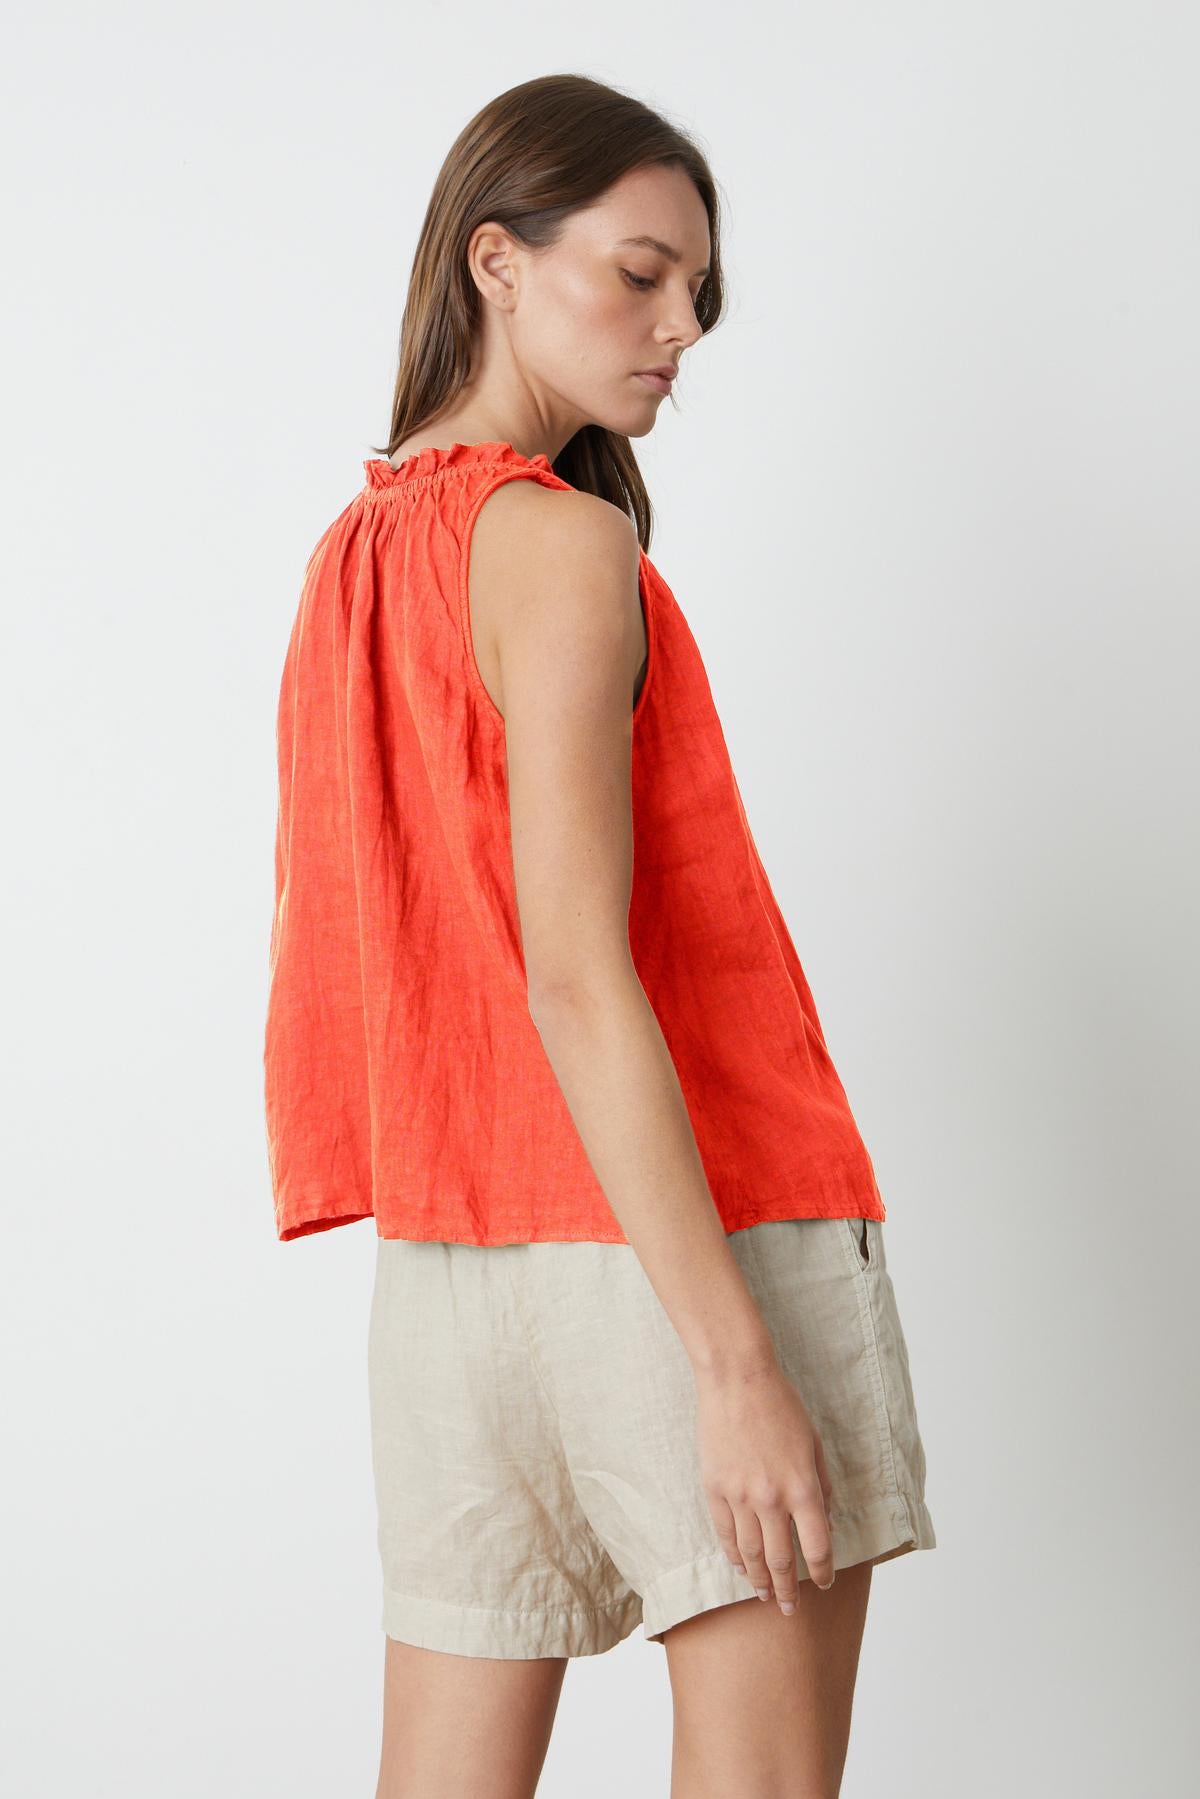 Zoey Tank Top in crimson linen with Tammy shorts back & side-26262129279169